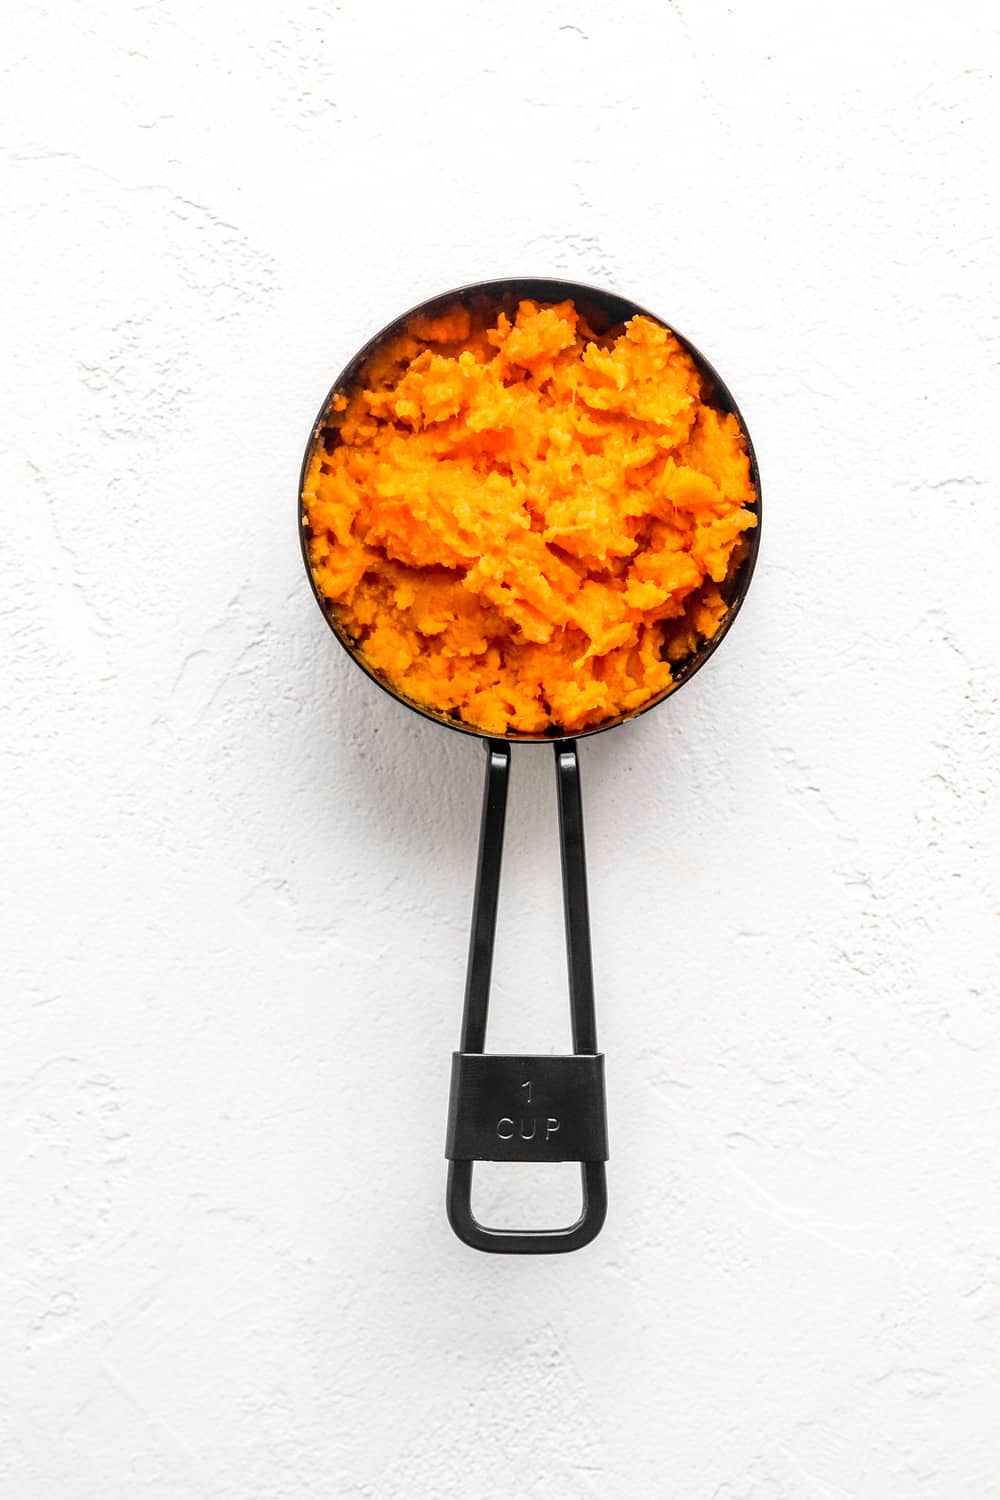 Mashed sweet potato in a black measuring cup on a white surface.